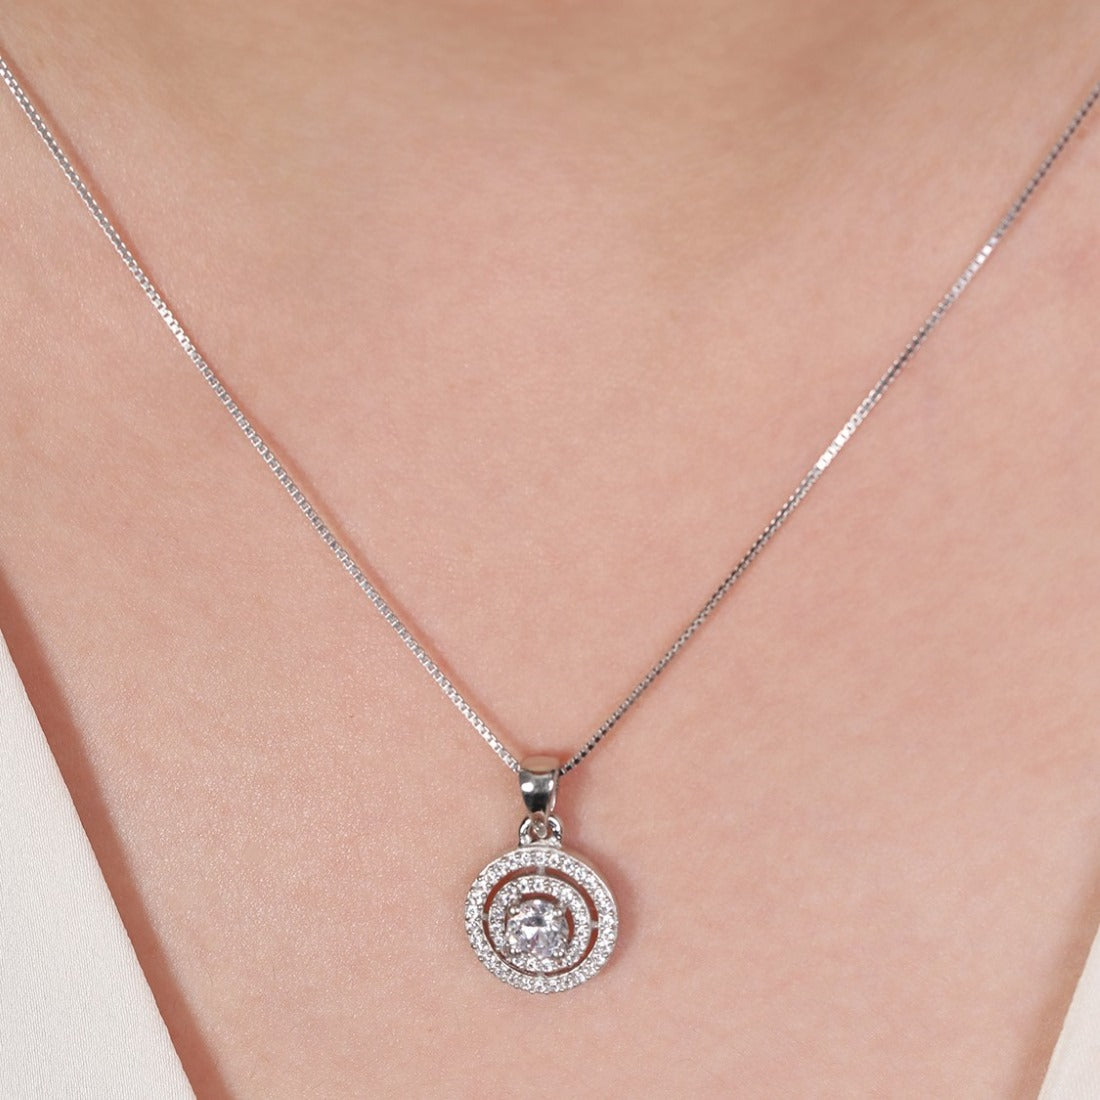 Eternal Circles Rhodium-Plated 925 Sterling Silver Pendant with Chain